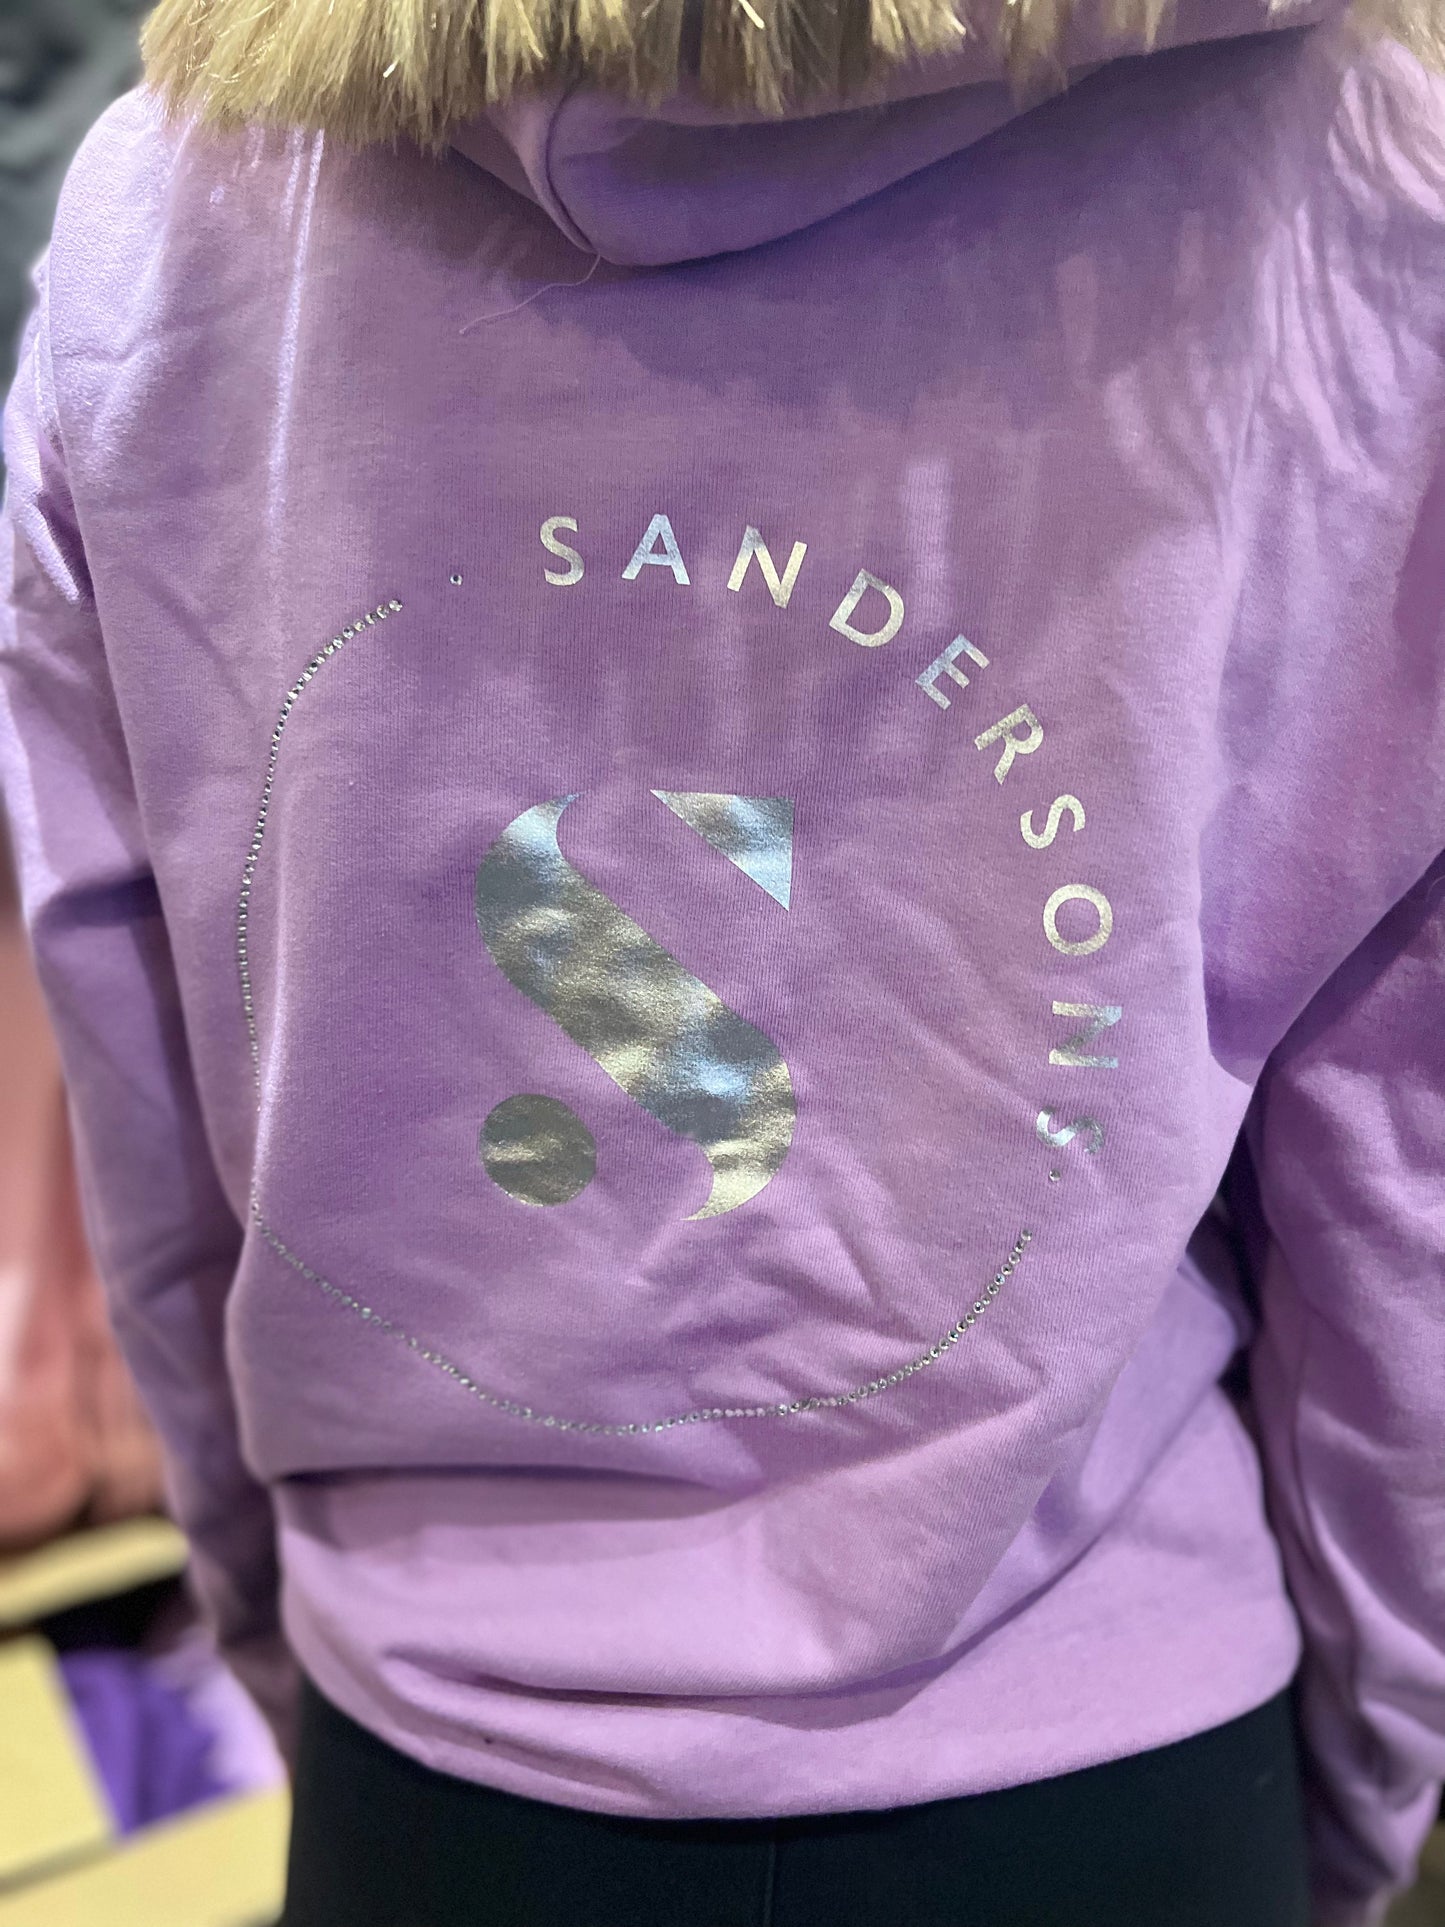 ADULT SIZES LAVENDER SANDERSONS PULLOVER HOODIE BY AXZNT WITH METALLIC SILVER BADGE PRINT AND LARGE METALLIC SILVER PRINT & STONES